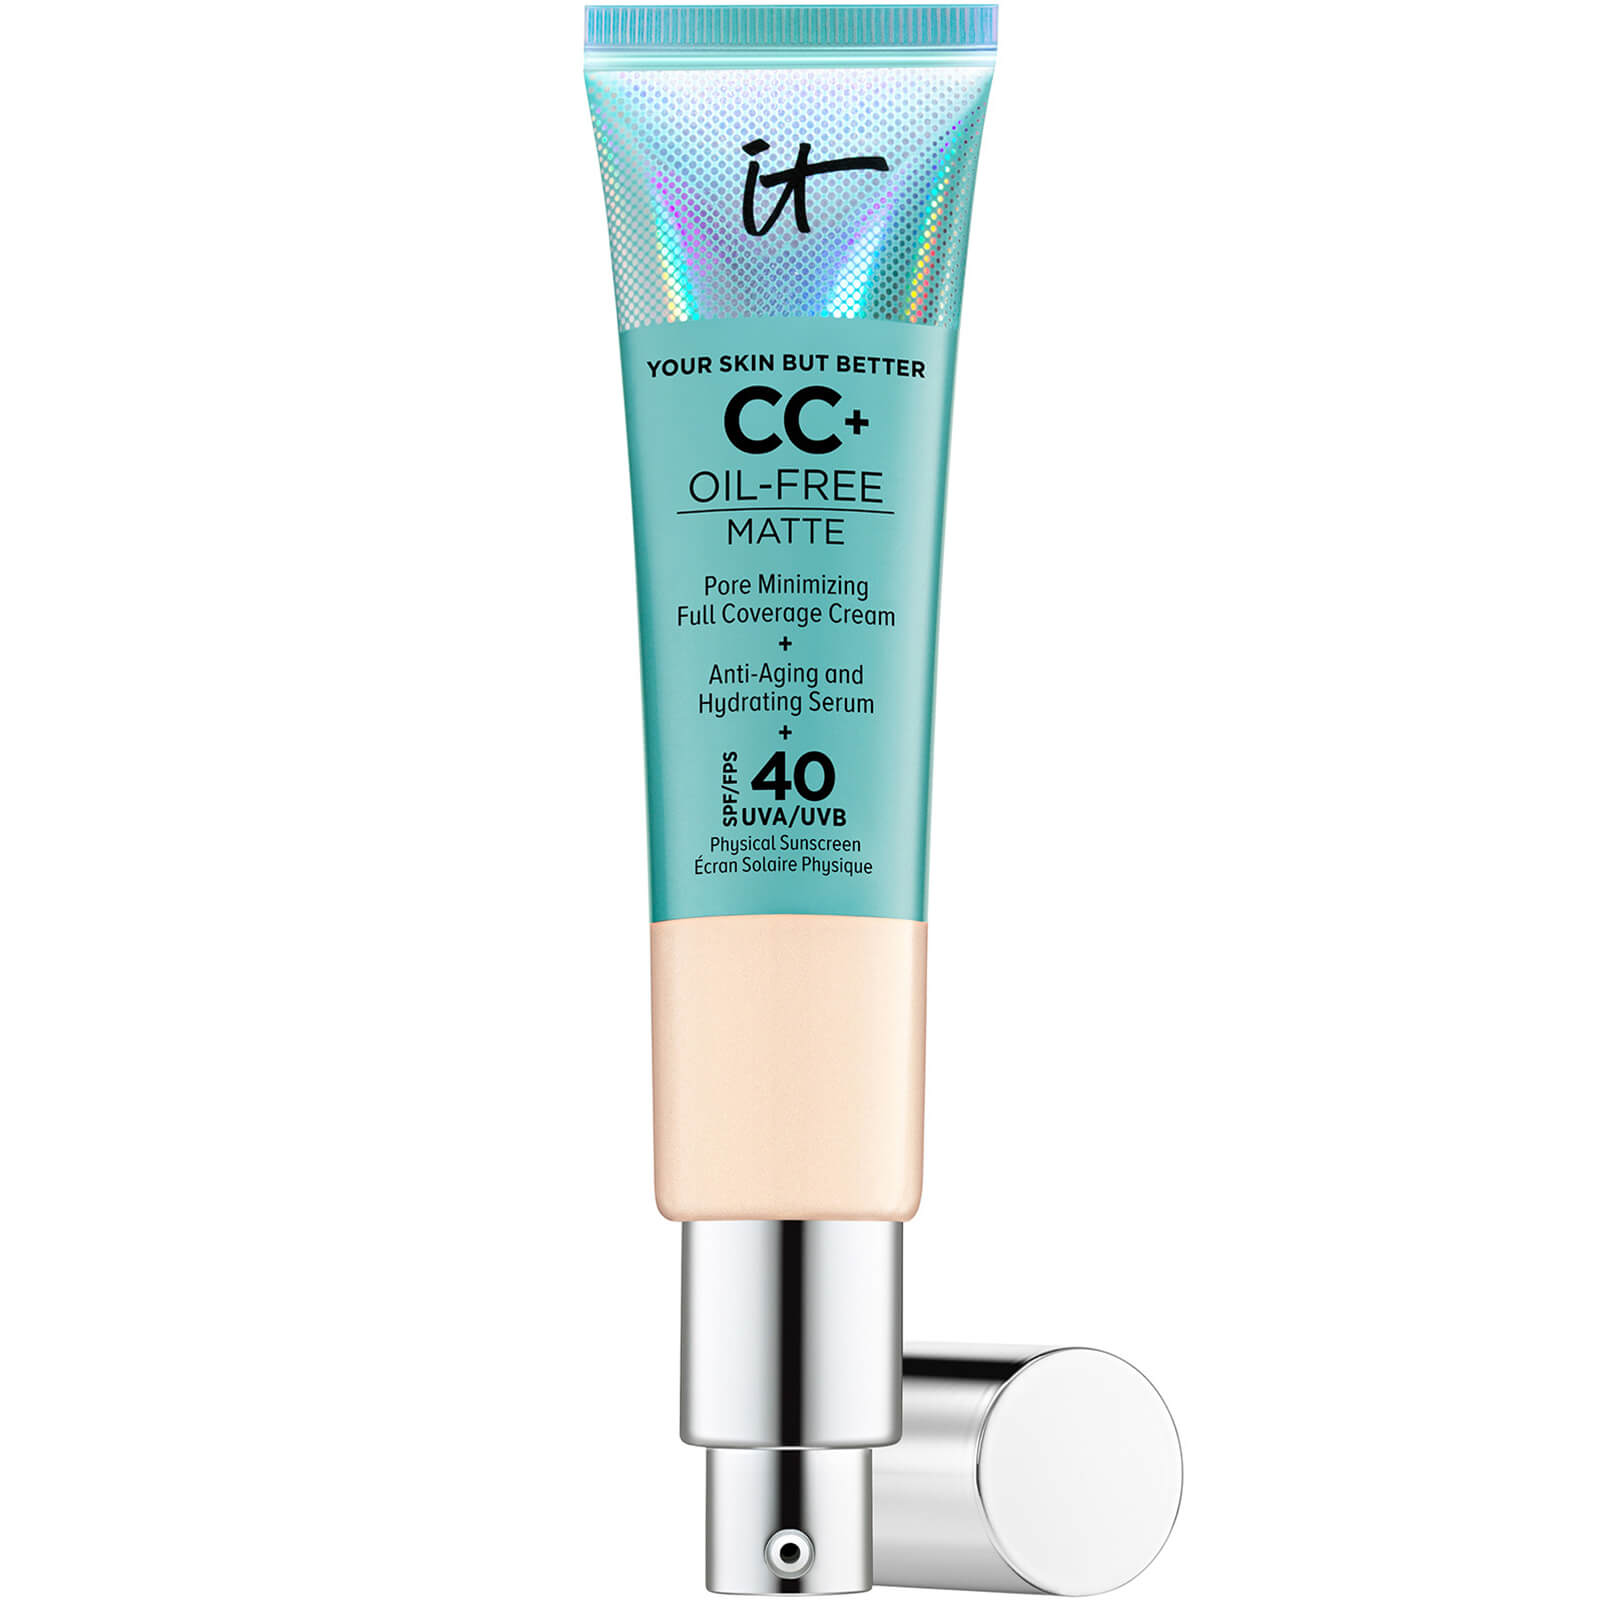 IT Cosmetics Your Skin But Better CC+ Oil-Free Matte SPF40 32ml (Various Shades) - Light